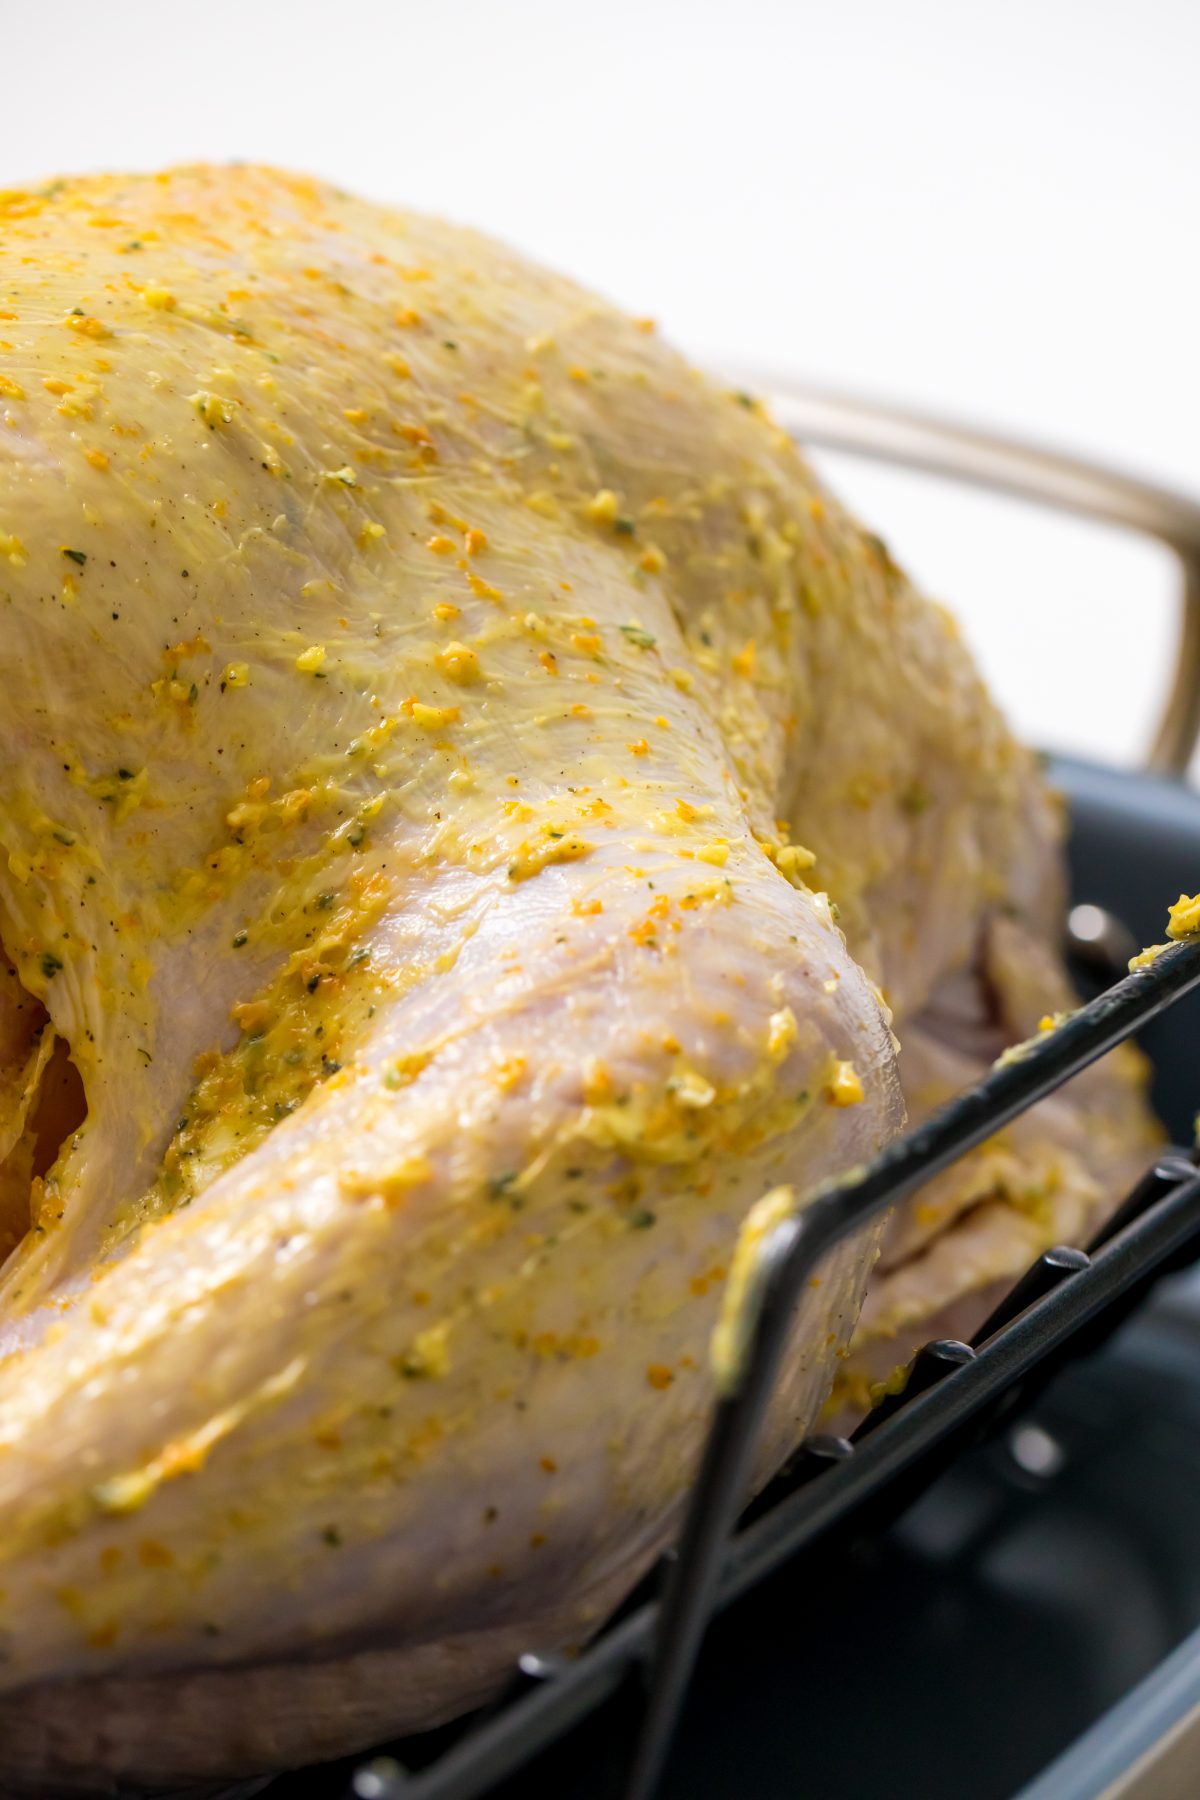 5D4B6975 - Orange Anise and Thyme Turkey - turkey covered in orange compound butter